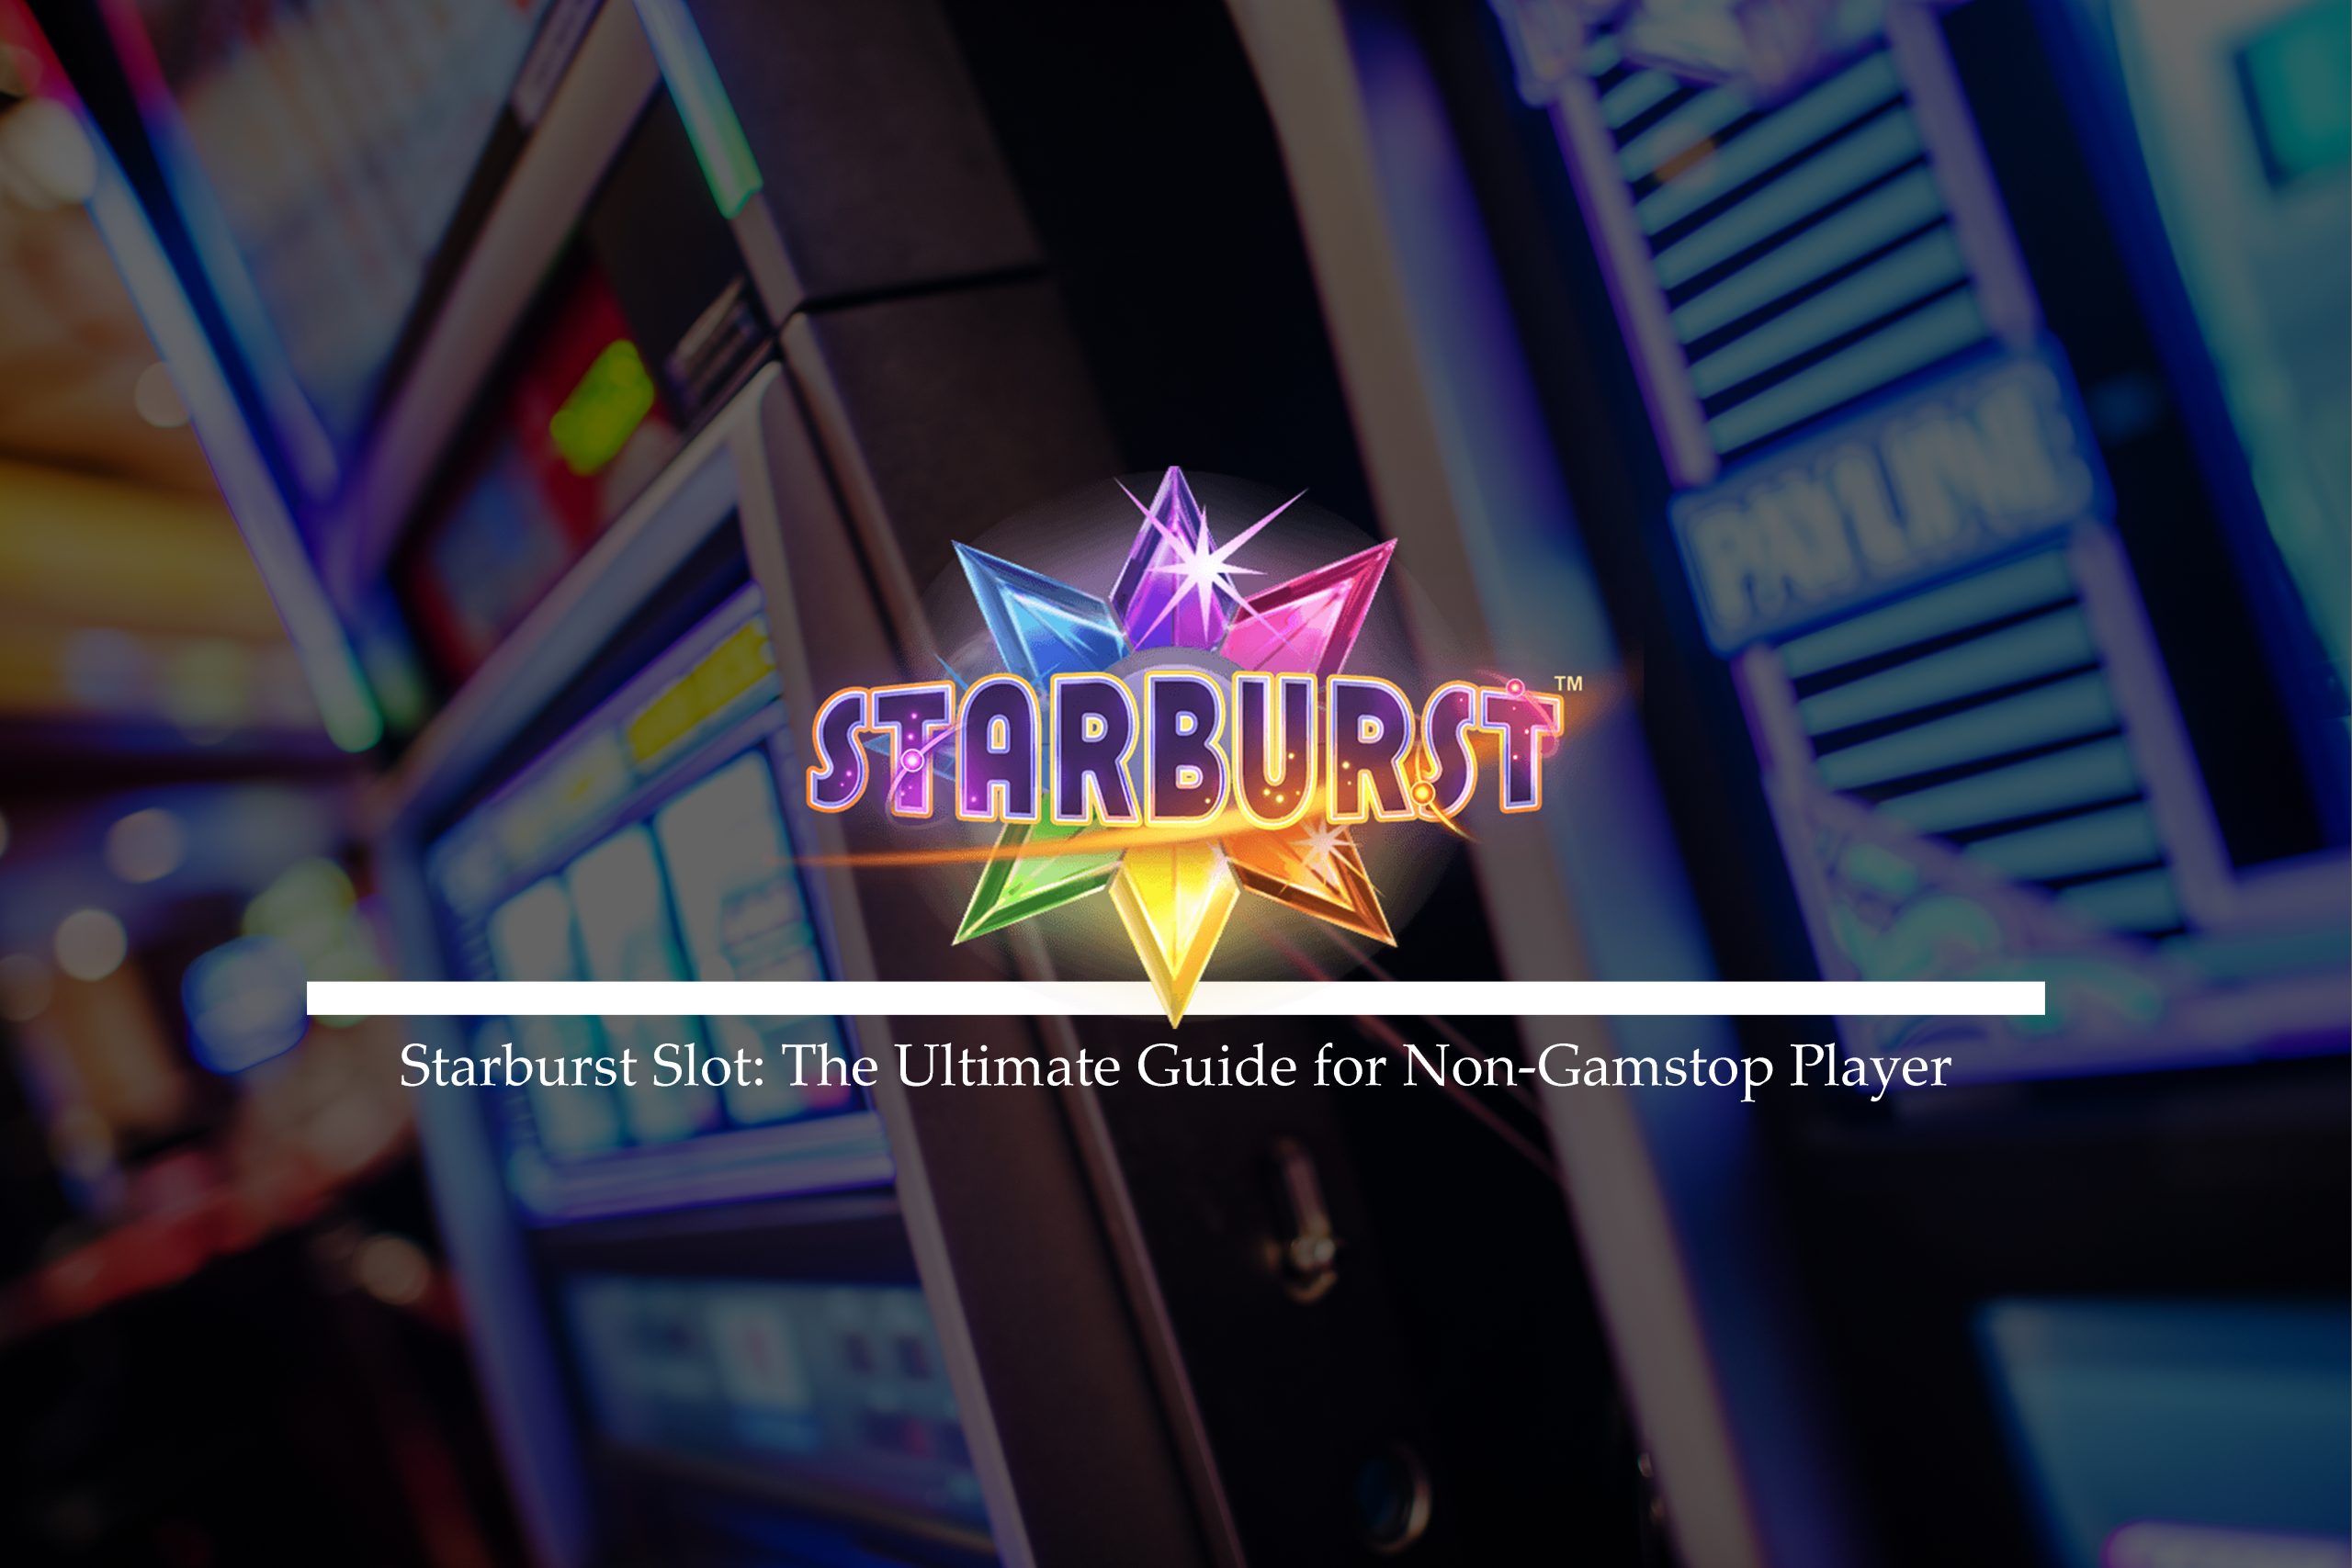 Starburst Slot: The Ultimate Guide for Non-Gamstop Player